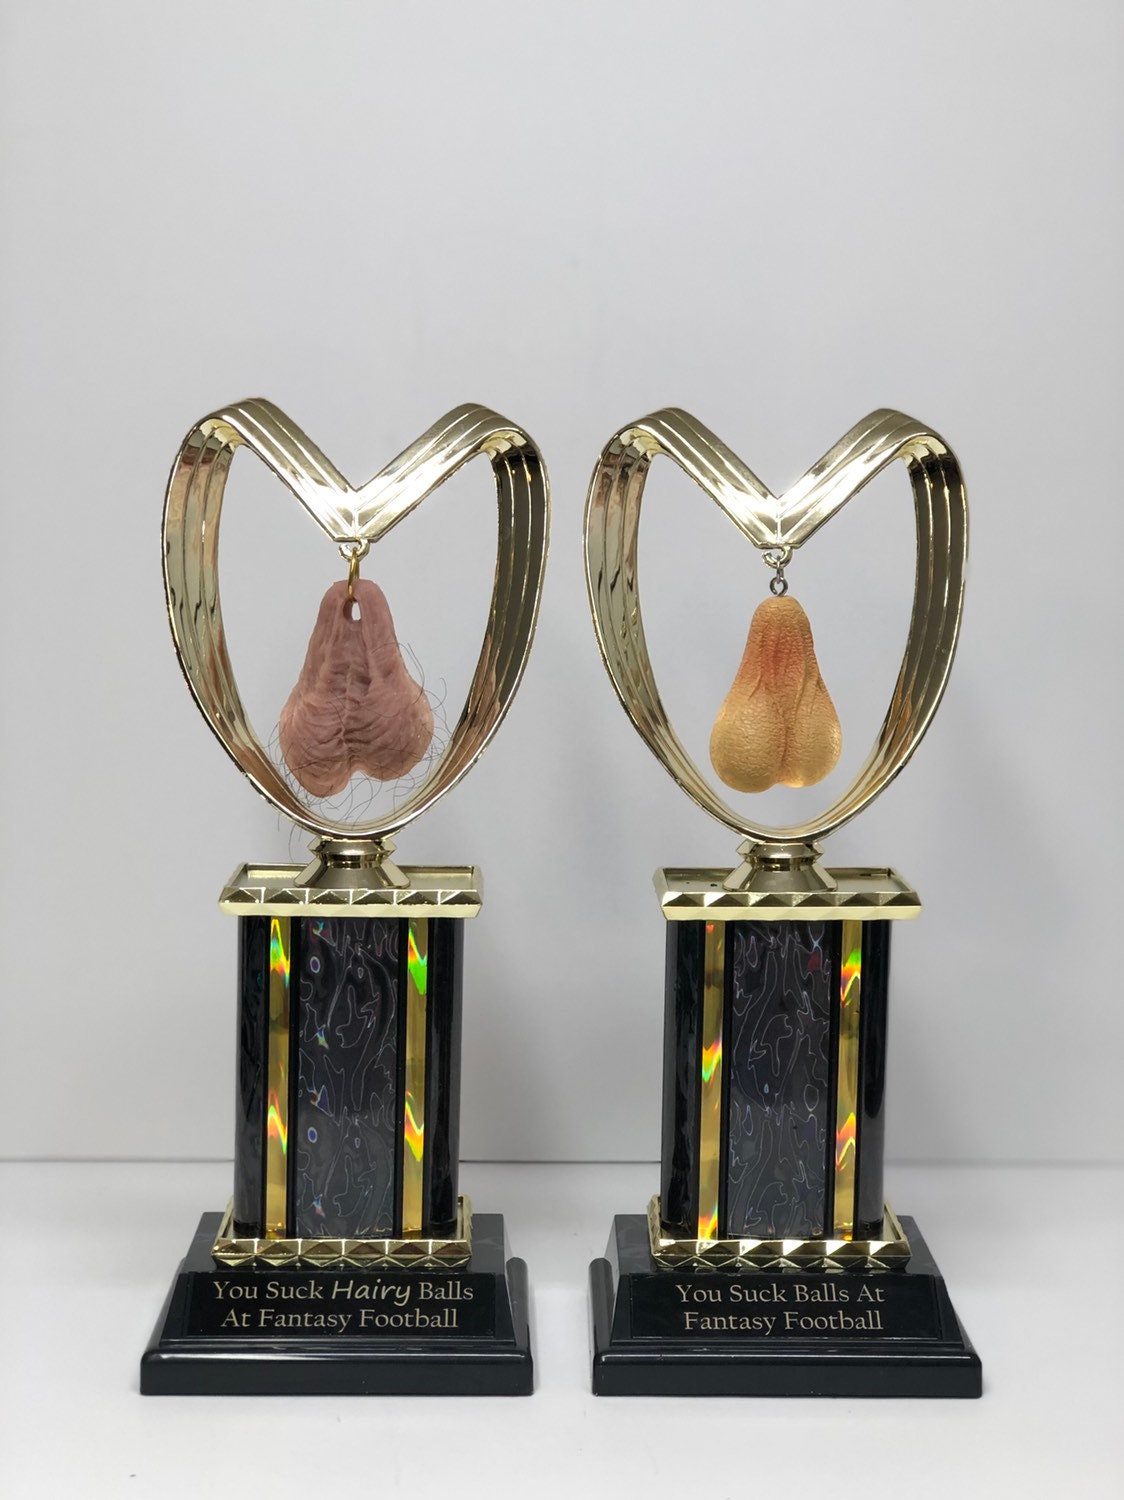 Fantasy Football Sacko You Suck Balls Loser Trophy Last Place FFL Trophy You Suck HAIRY Balls Funny Trophy Adult Humor Gag Gift Testicle